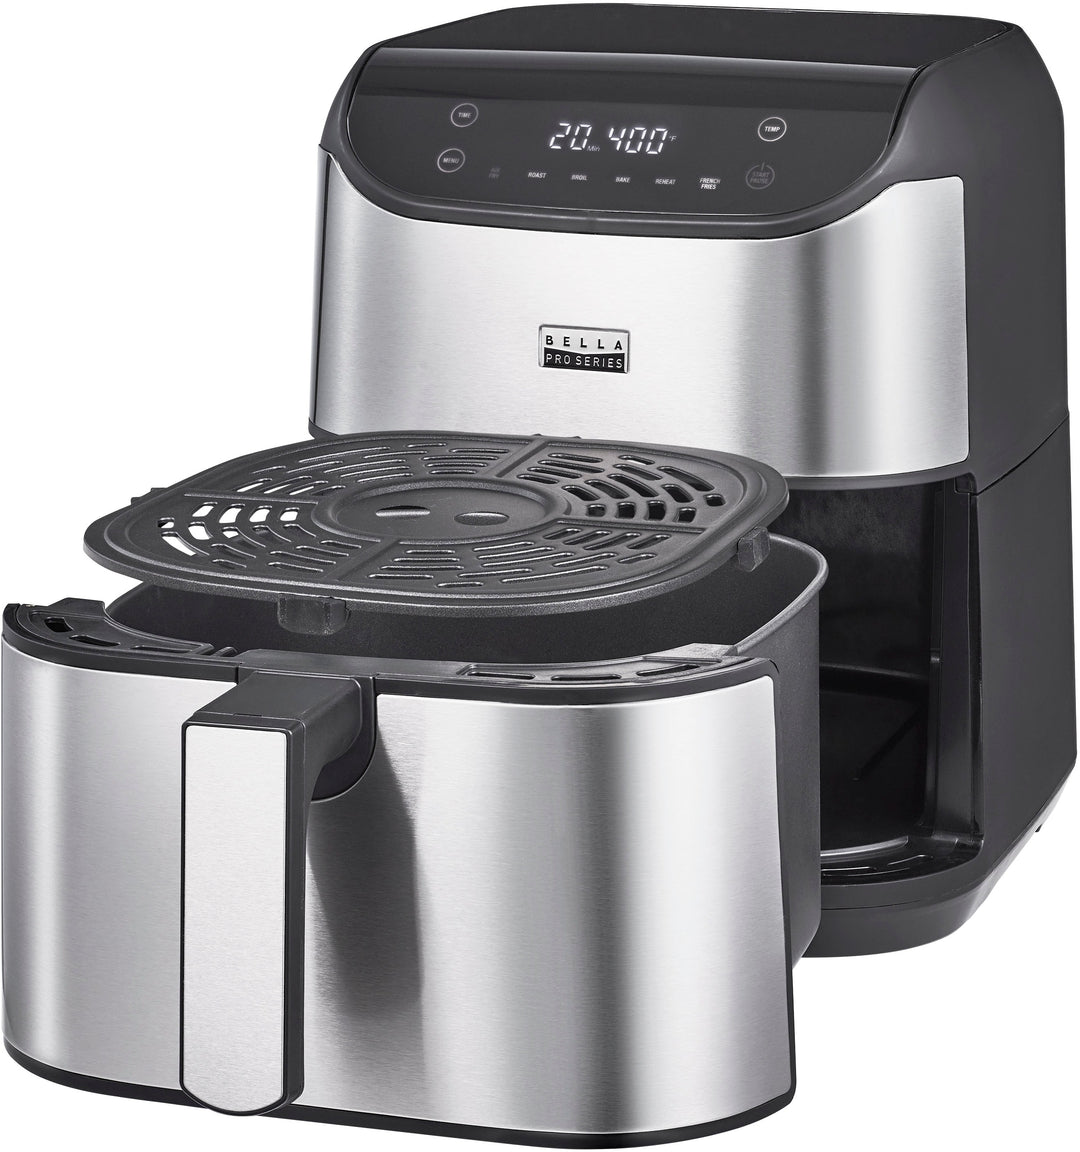 Bella Pro Series - 6-qt. Digital Air Fryer with Stainless Finish - Stainless Steel_9